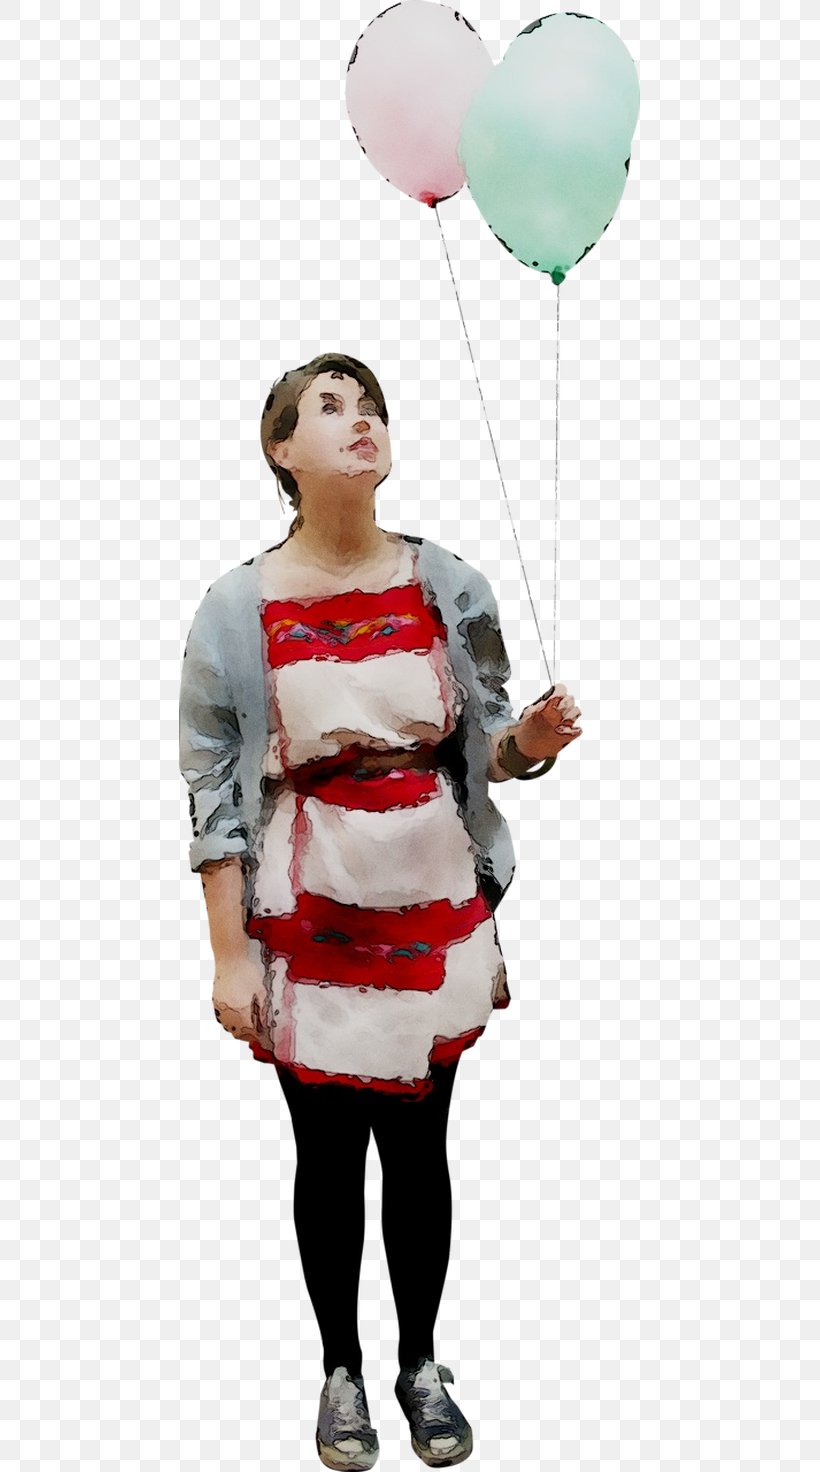 Illustration Balloon, PNG, 461x1472px, Balloon, Clothing, Costume, Fashion Design Download Free